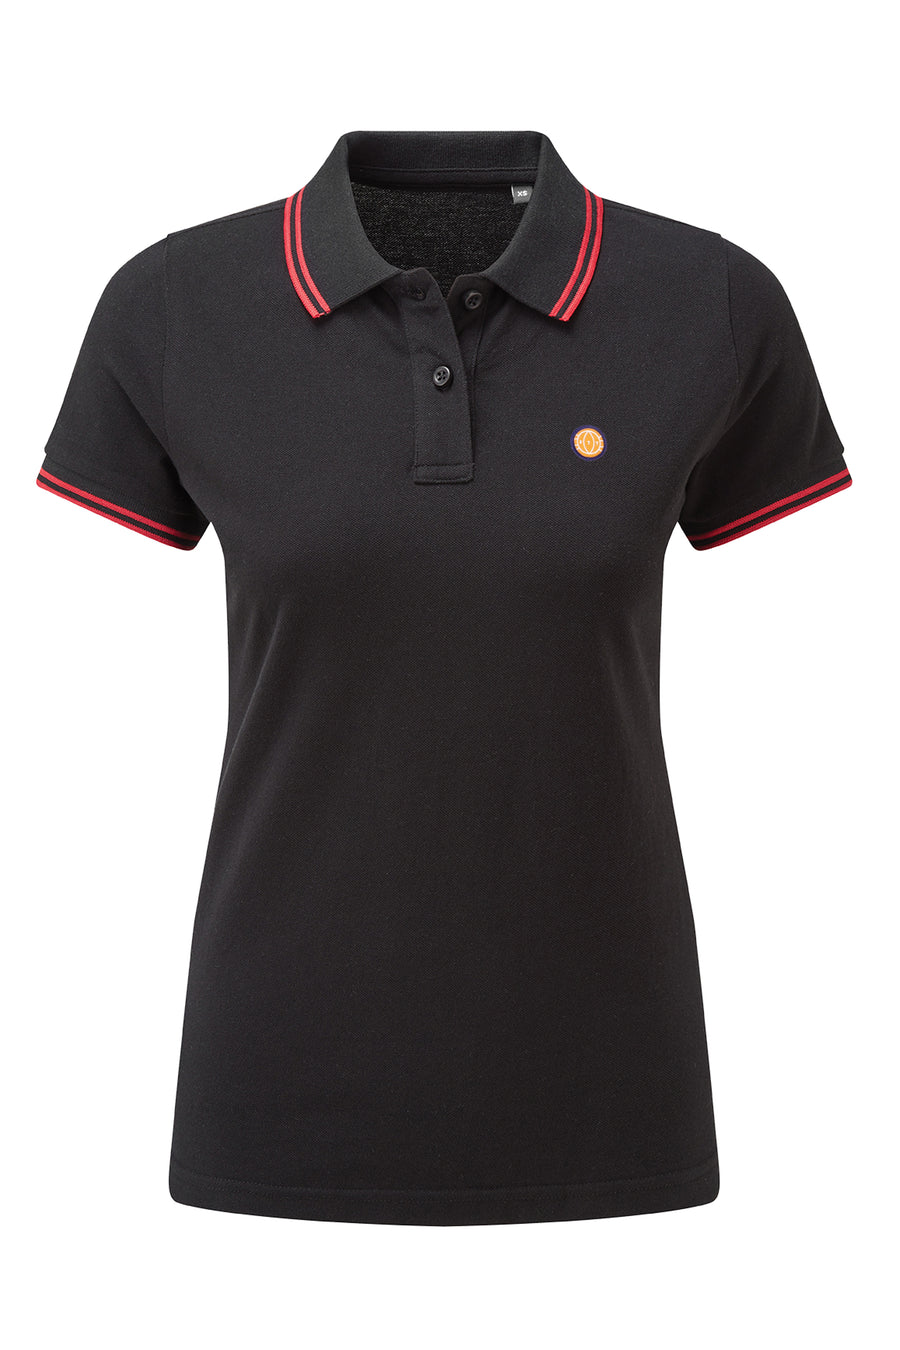 Women's Black and Red Tipped FTT Polo